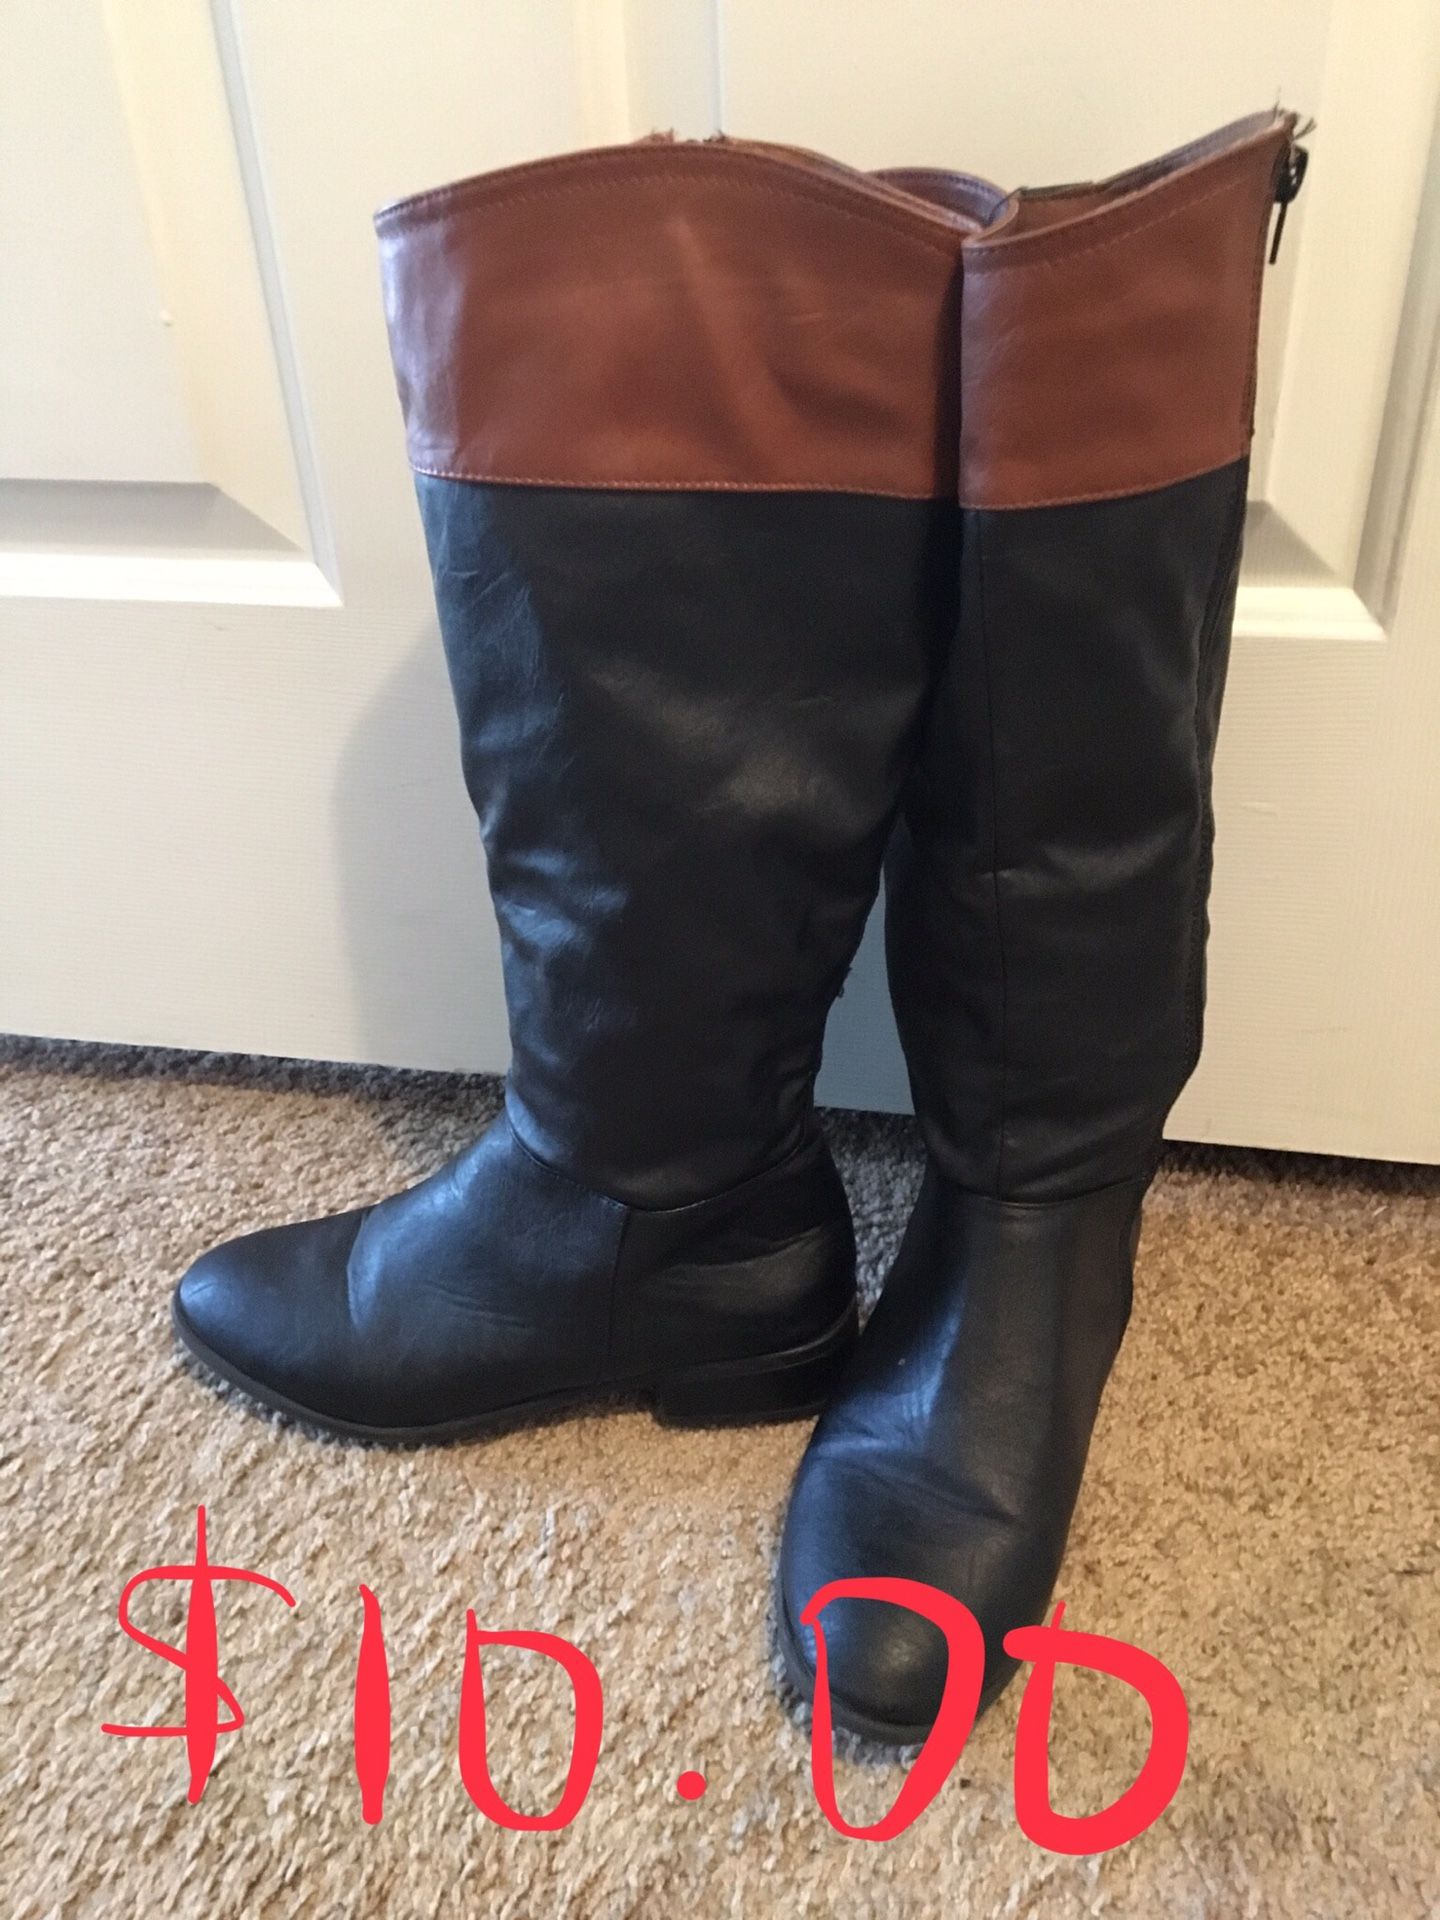 Boots-Size 7.5